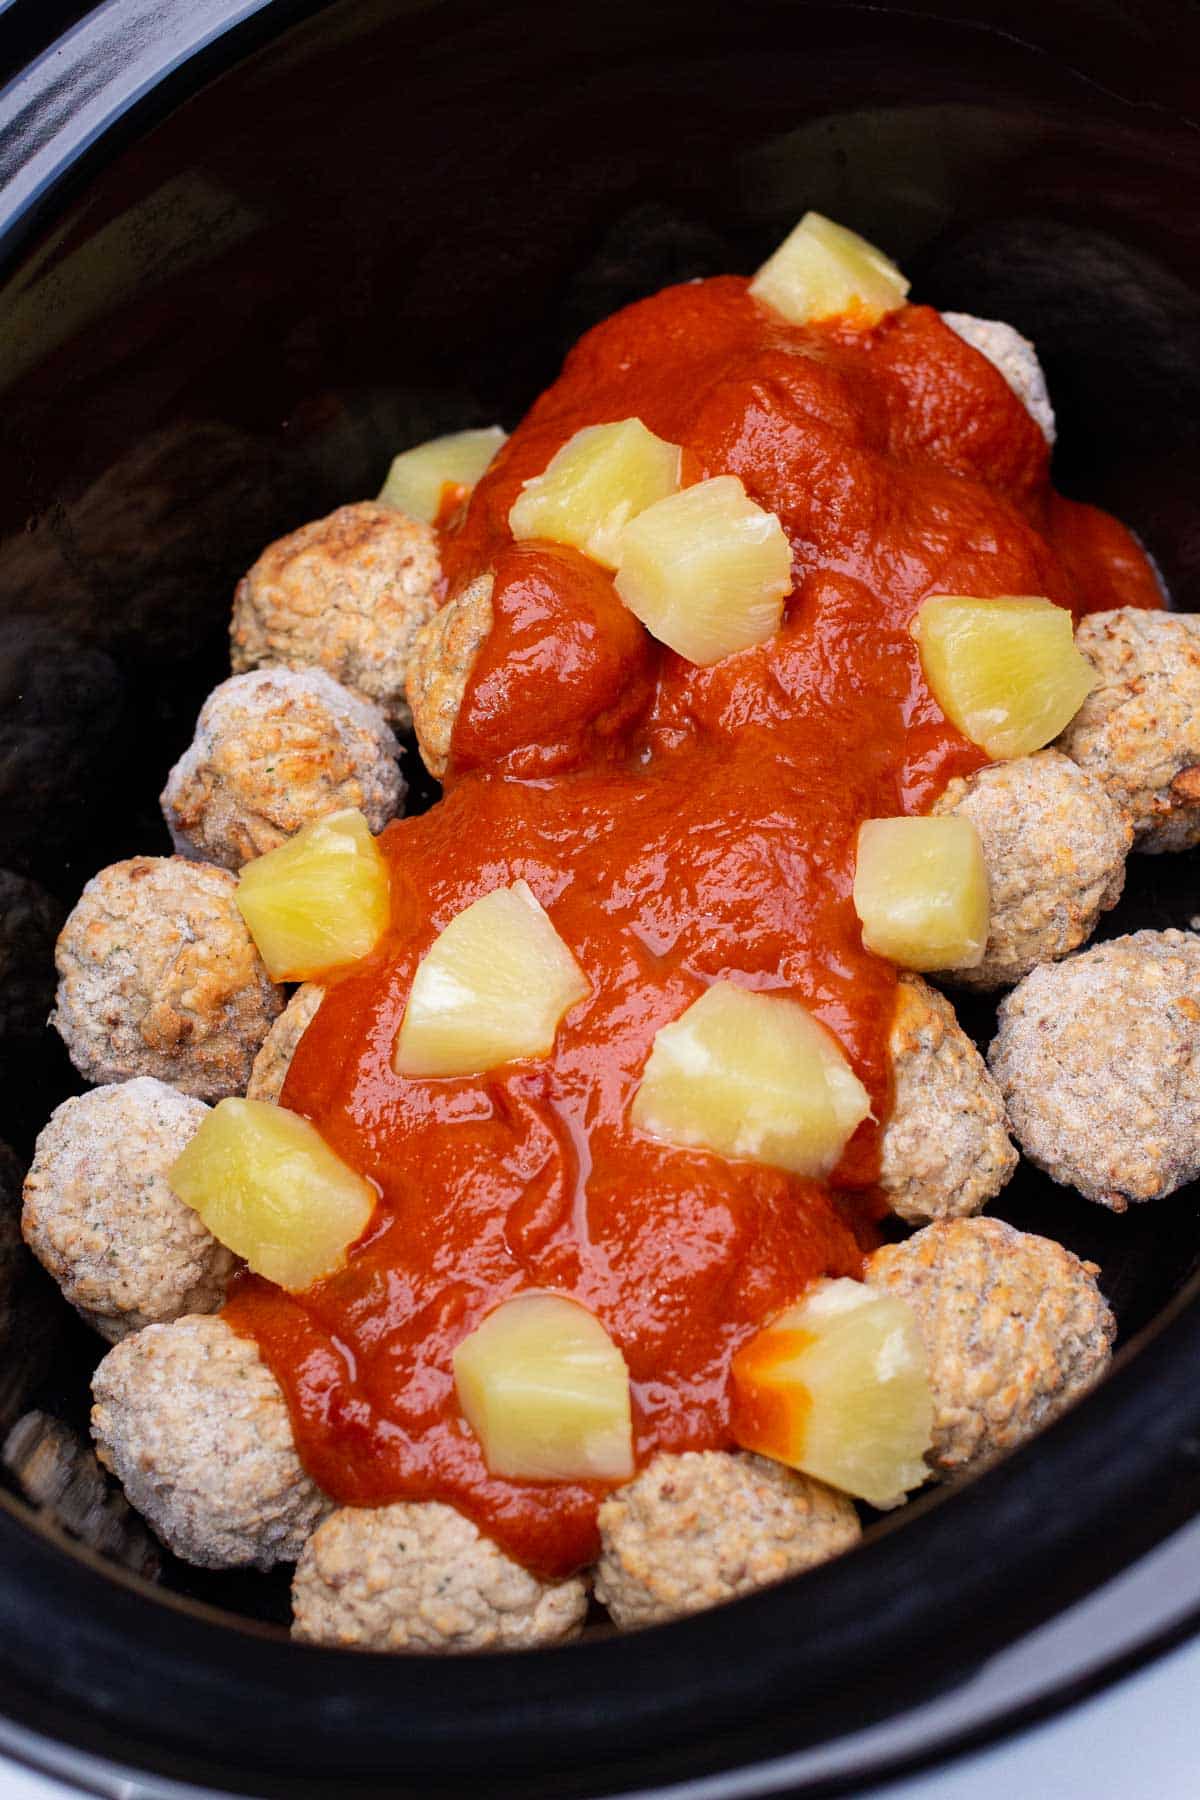 Frozen meatballs, sloppy joe sauce, and canned pineapple layered in the slow cooker.